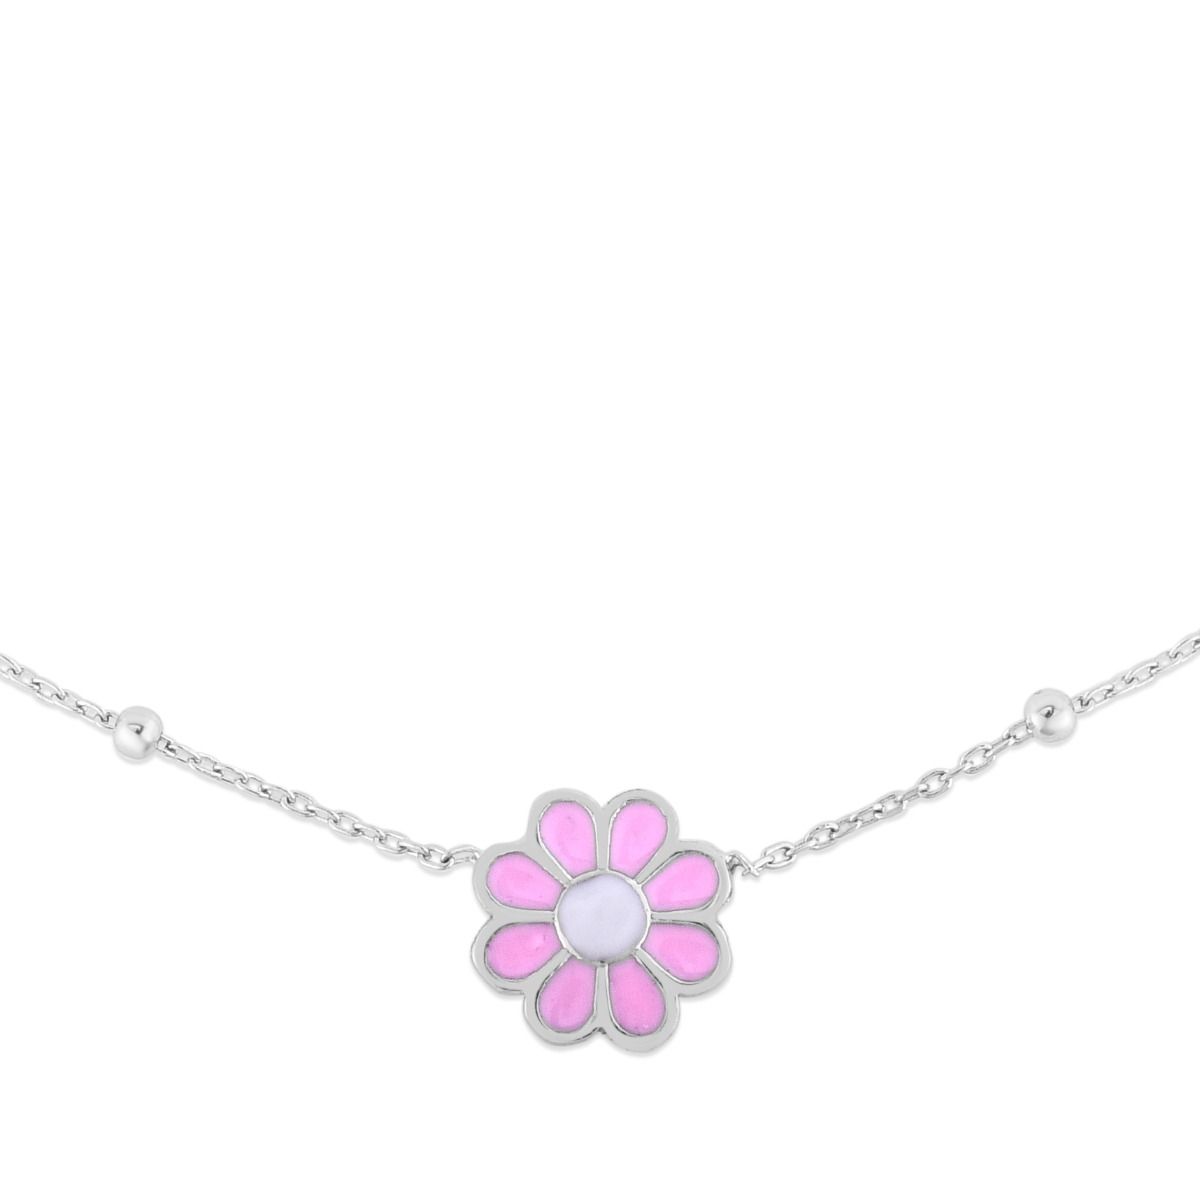 Silver and pink enamel flower necklace